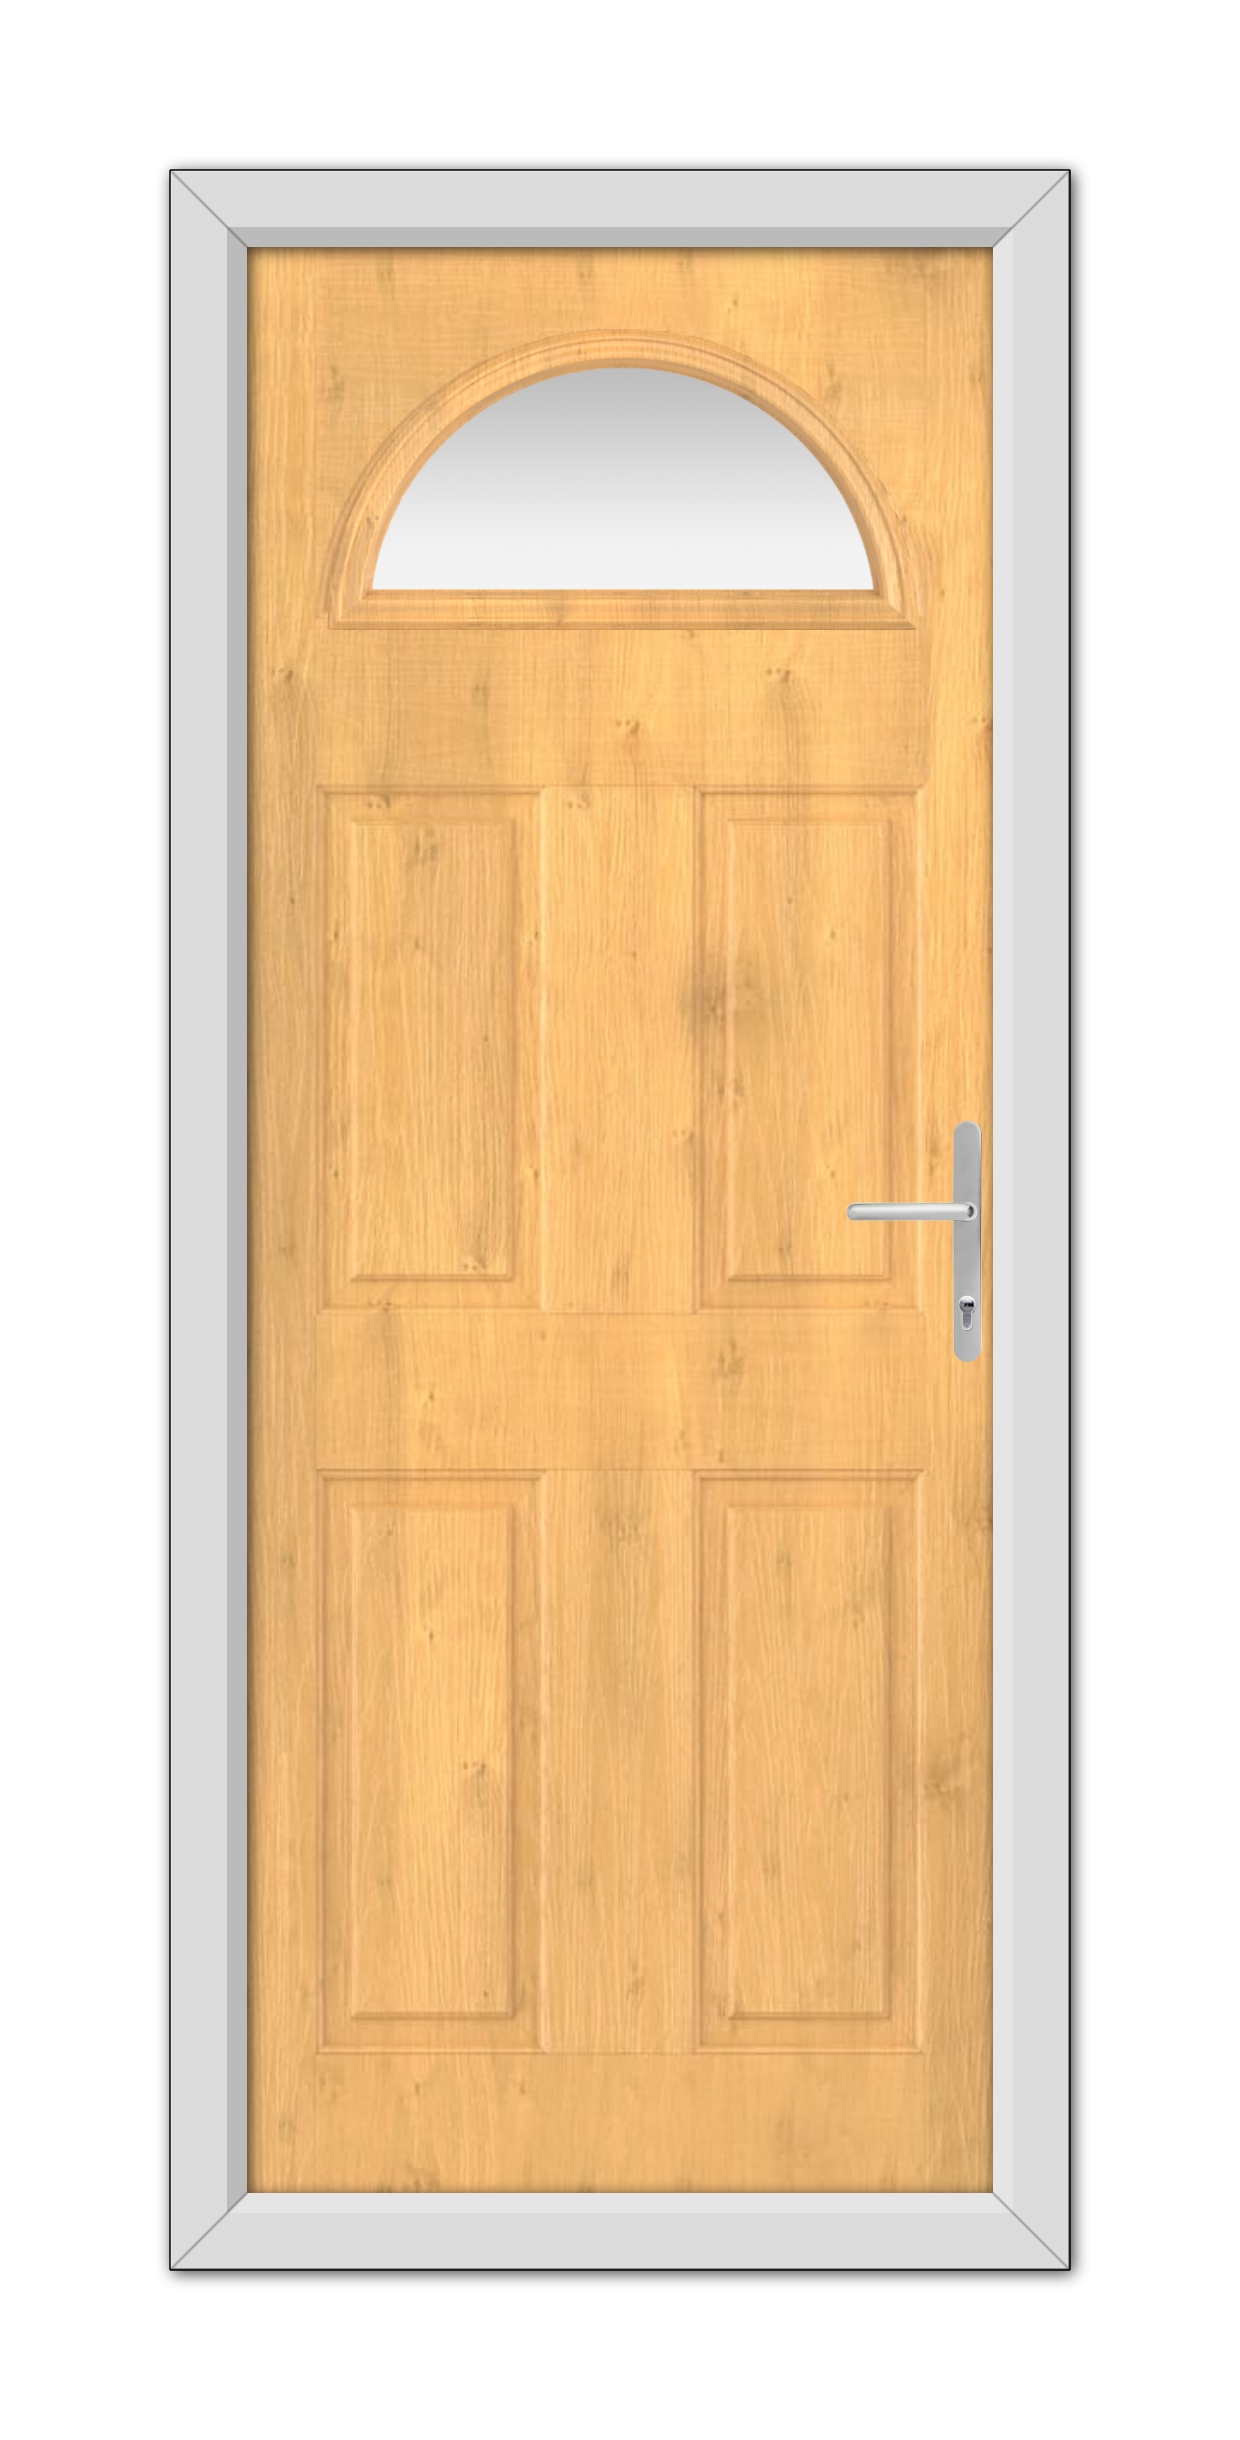 A Irish Oak Winslow 1 Composite Door 48mm Timber Core with an arched window at the top and a metallic handle, set within a gray frame.